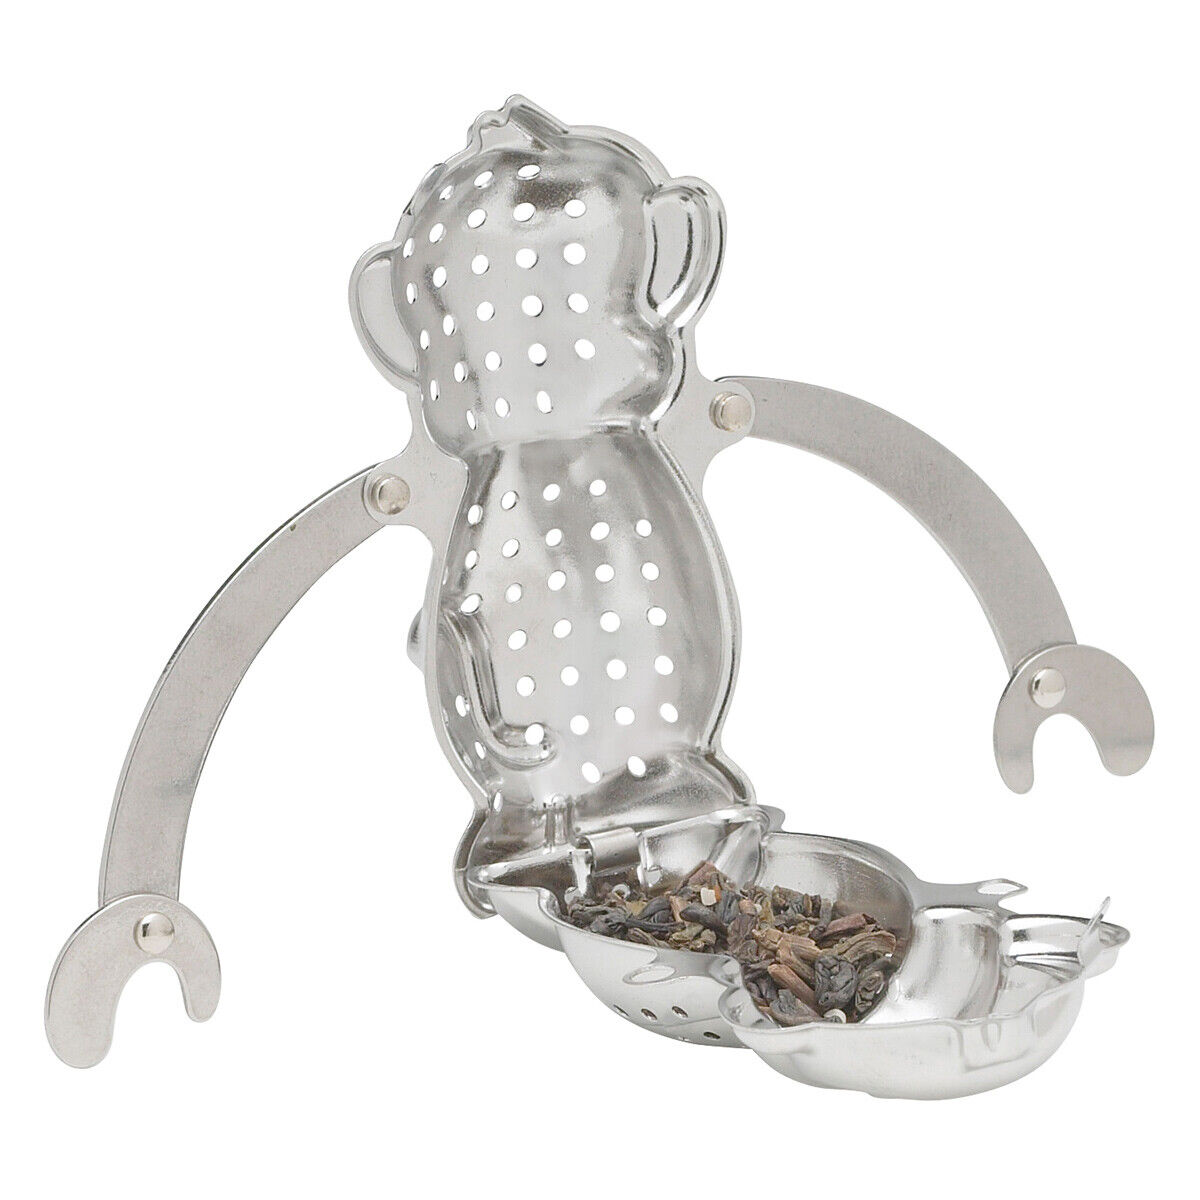 Monkey Tea Infuser with Drip Tray fits any size cup